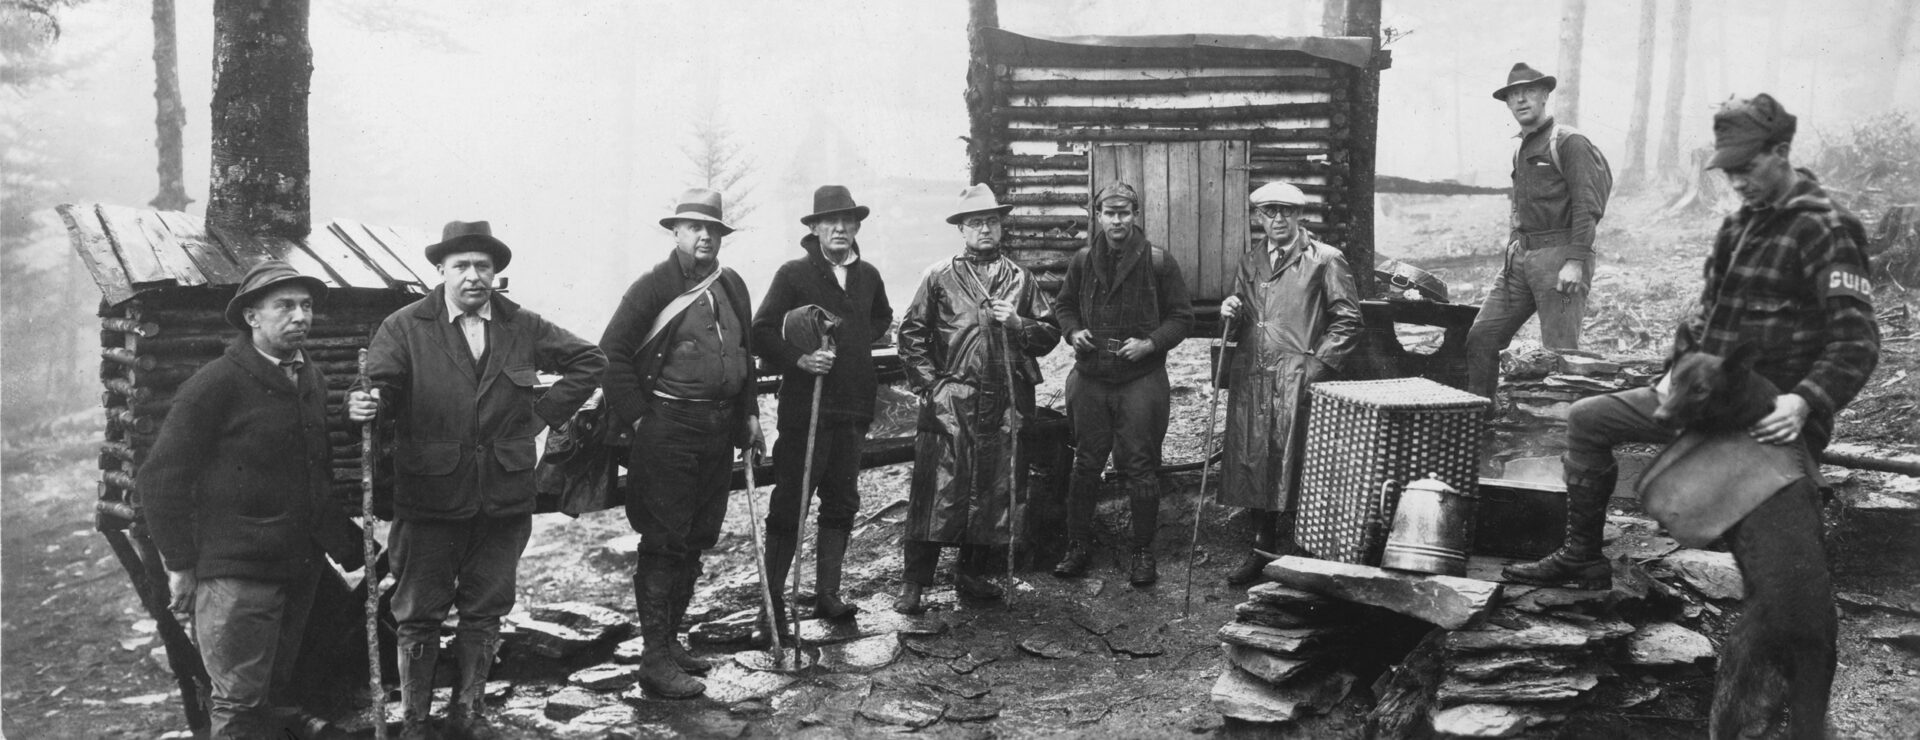 Knoxvillians on Mt Le Conte, 1927. Florist Brockway Crouch is fourth from left; Jim Thompson is second from right, and next to him is trail guide Paul Adams with his legendary dog, Cumberland Jack (or Smoky Jack as he was known when he was in the mountains.) (University of Tennessee Libraries)